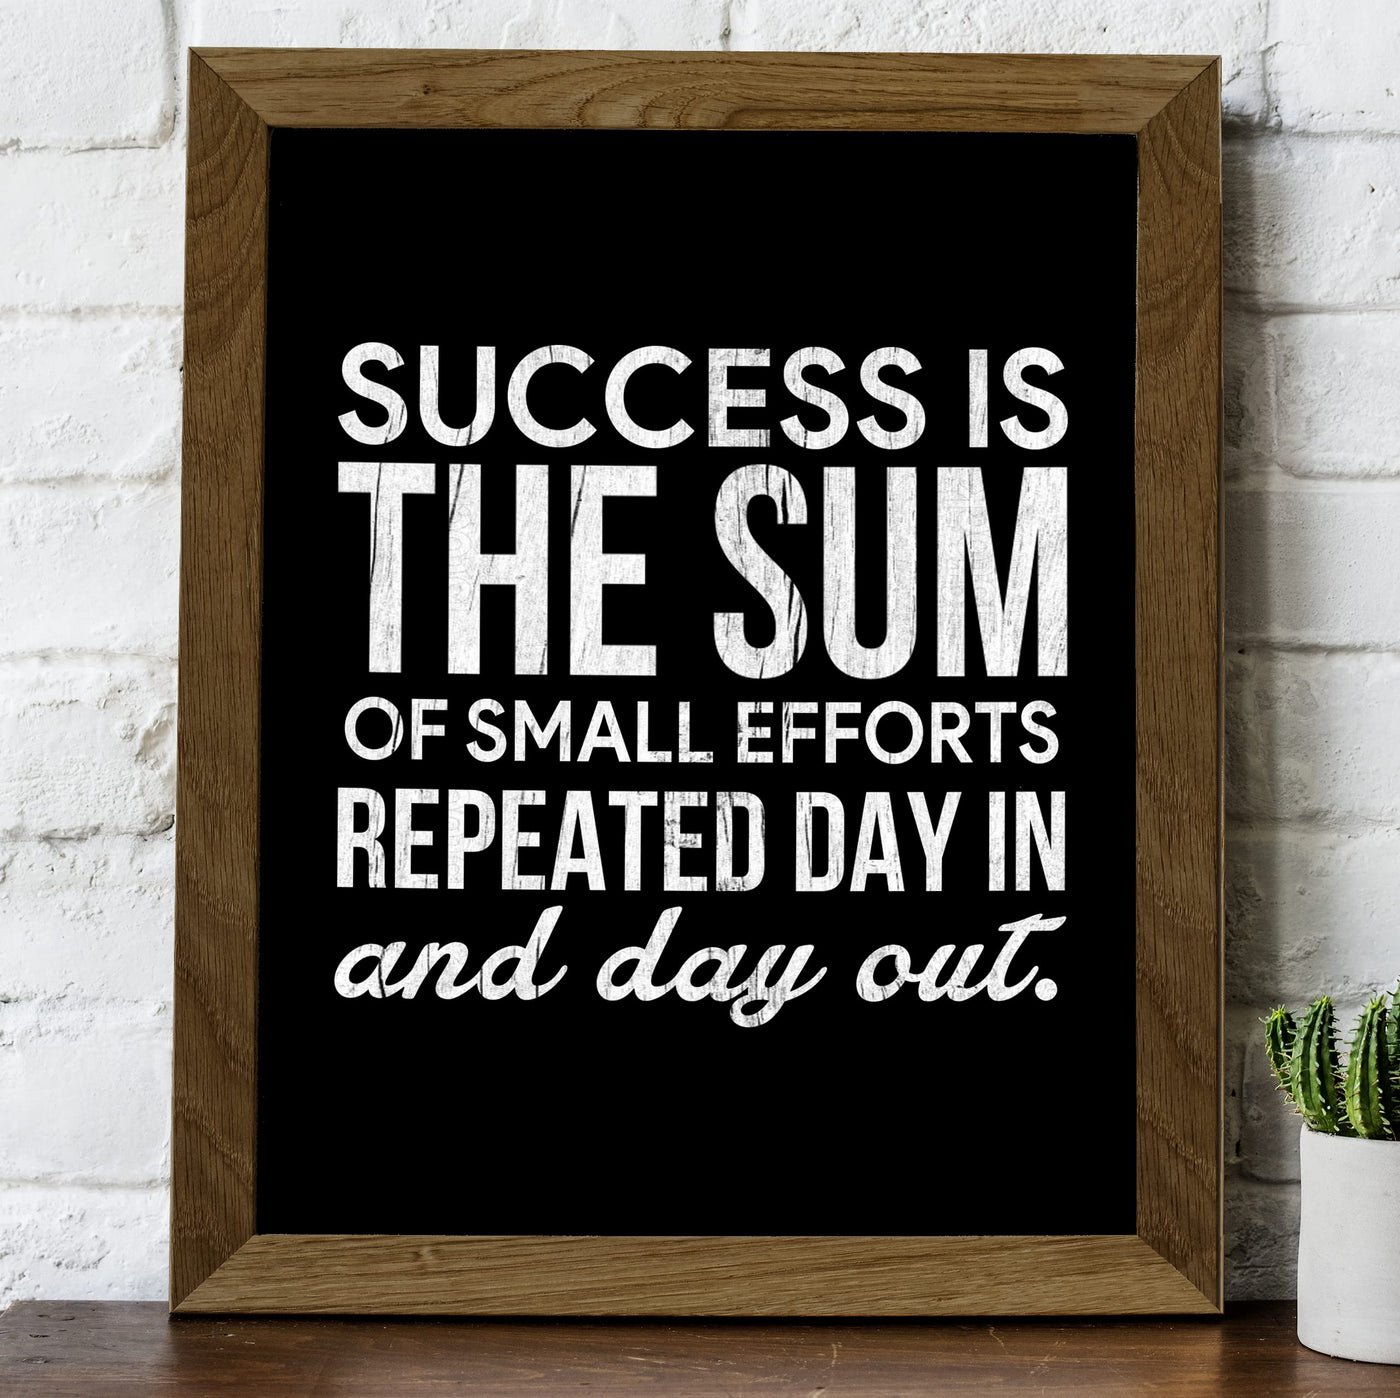 Success Is the Sum of Small Efforts- Motivational Wall Art Decor -8 x 10" Rustic Inspirational Typography Print - Ready to Frame. Modern Home-Office-Classroom-Gym Decor. Great Gift for Motivation!